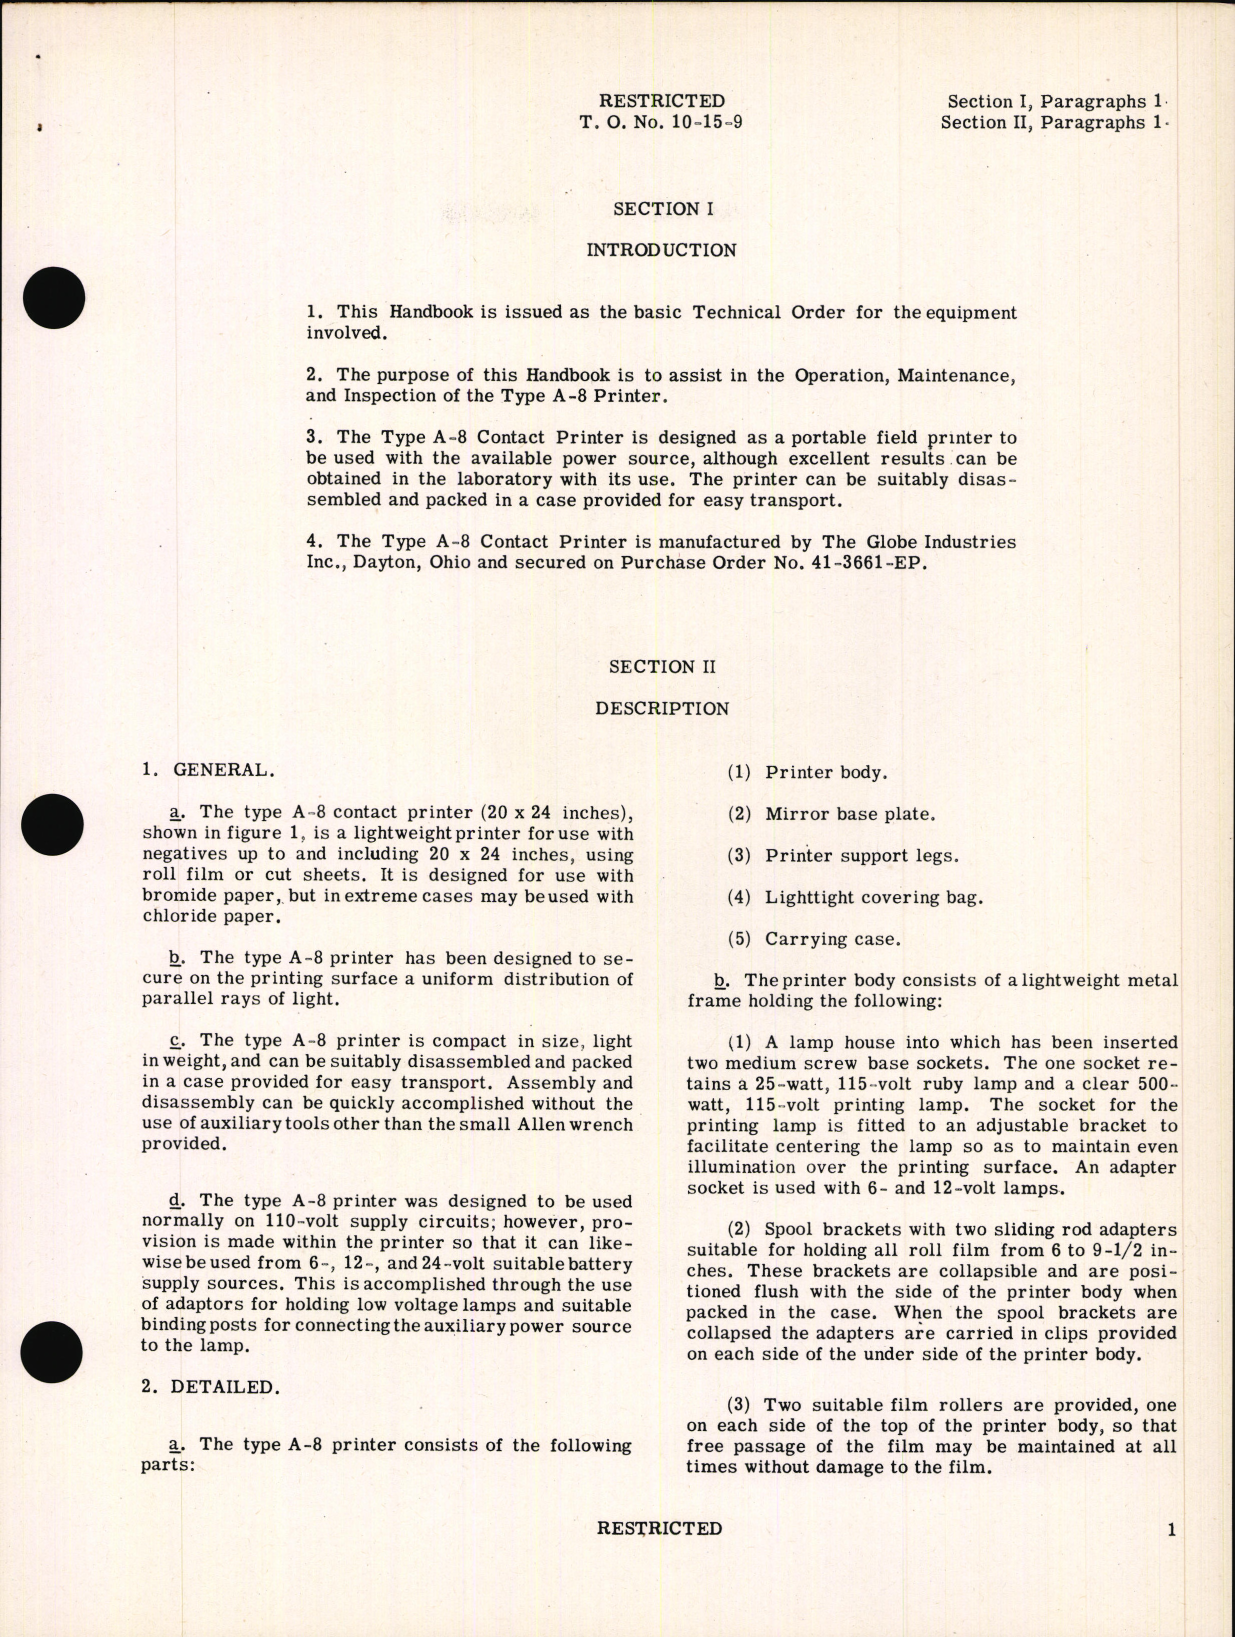 Sample page 5 from AirCorps Library document: Handbook of Instructions with Parts Catalog for Type A-8 Contact Printer for Type A Portable Laboratories